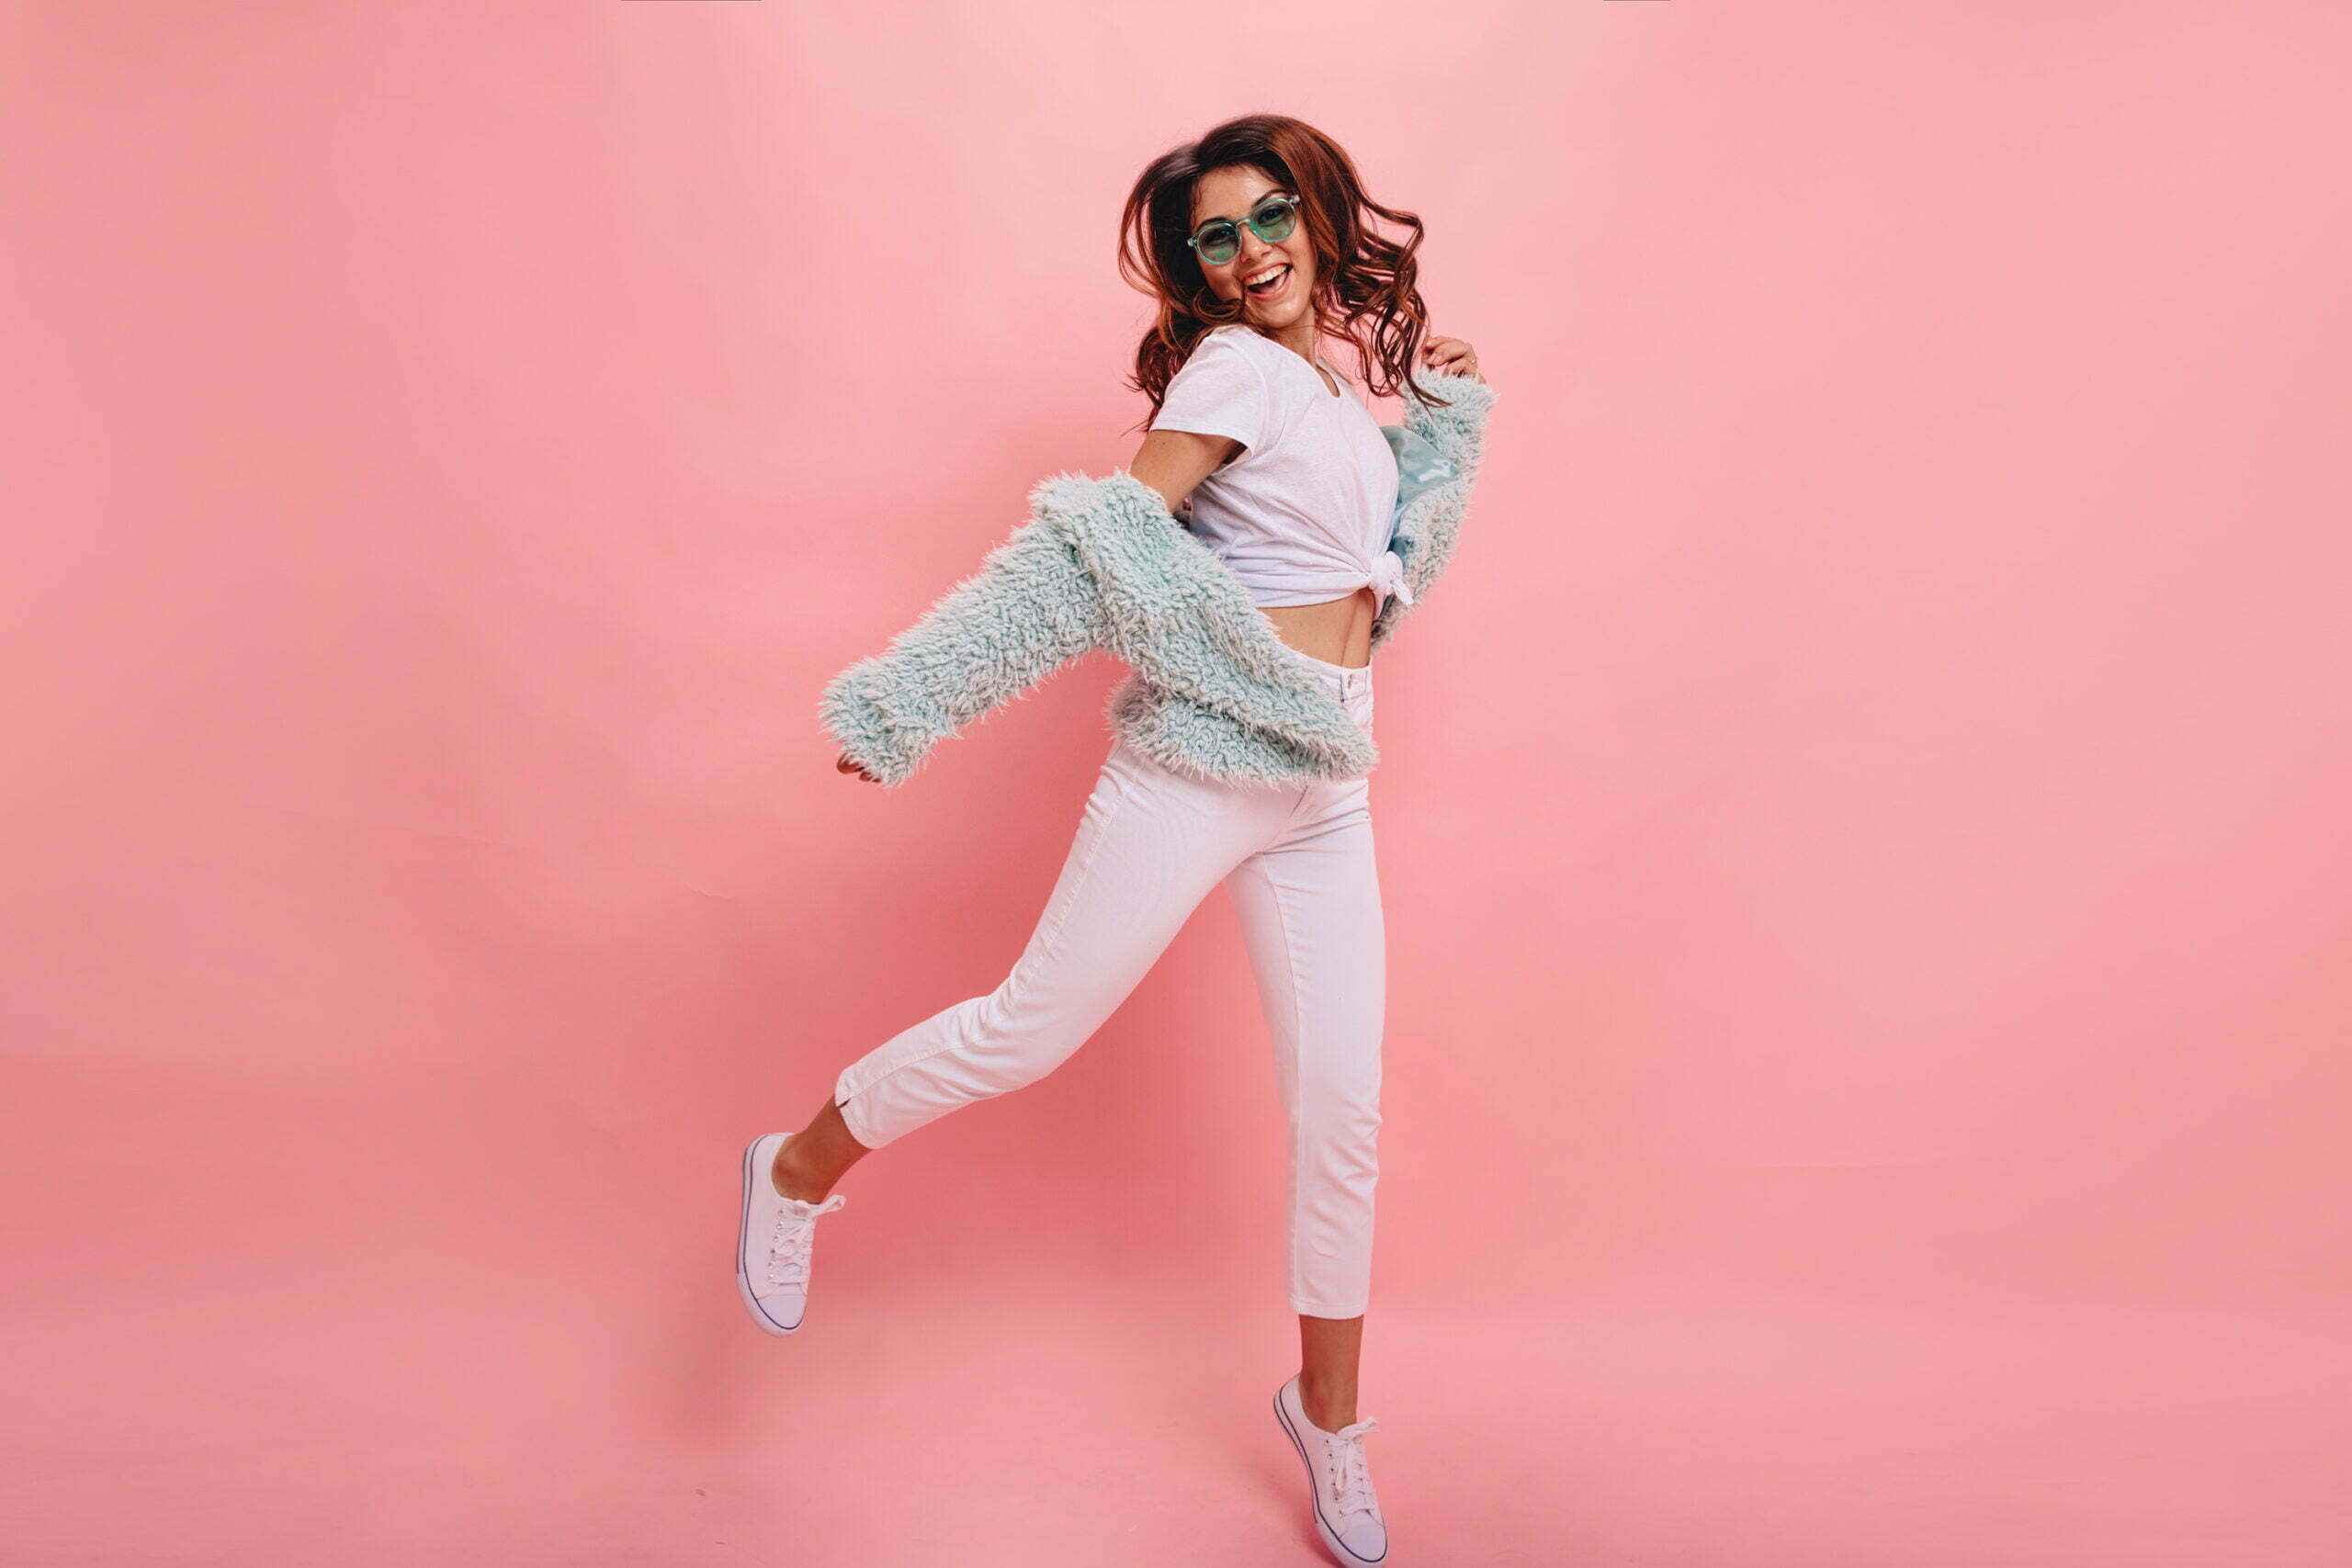 Inspired positive girl in white sneakers dancing on pink background. Gorgeous young female model with dark wavy hair jumping in studio. Not isolated. Copy space.